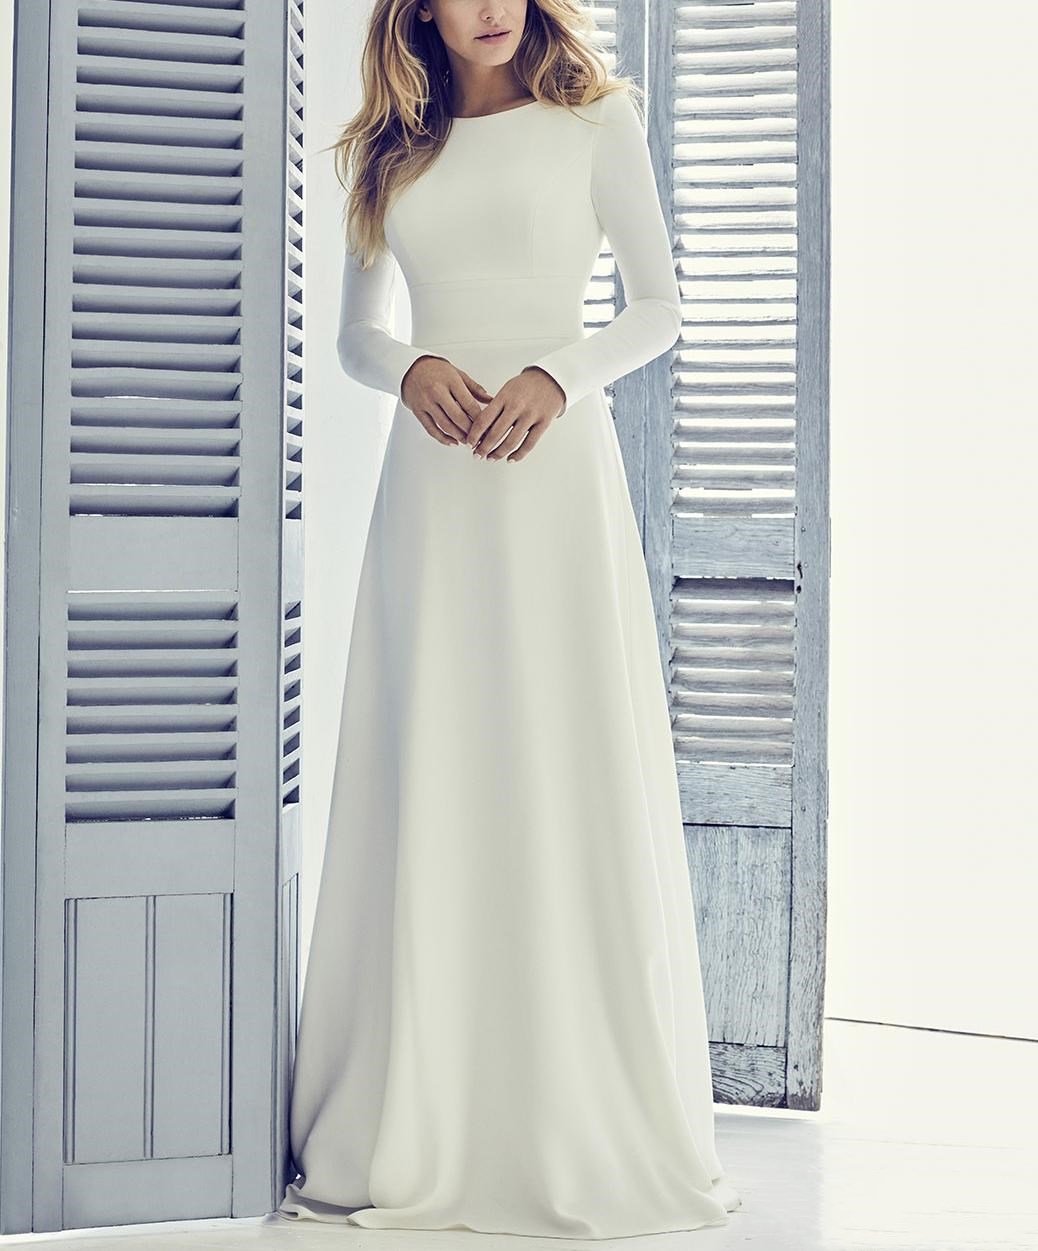 Image of Crepe A-line Modest Wedding Dress With Long Sleeves Jewel Neck Coverd Back Short Train Women Informal Bridal Gown